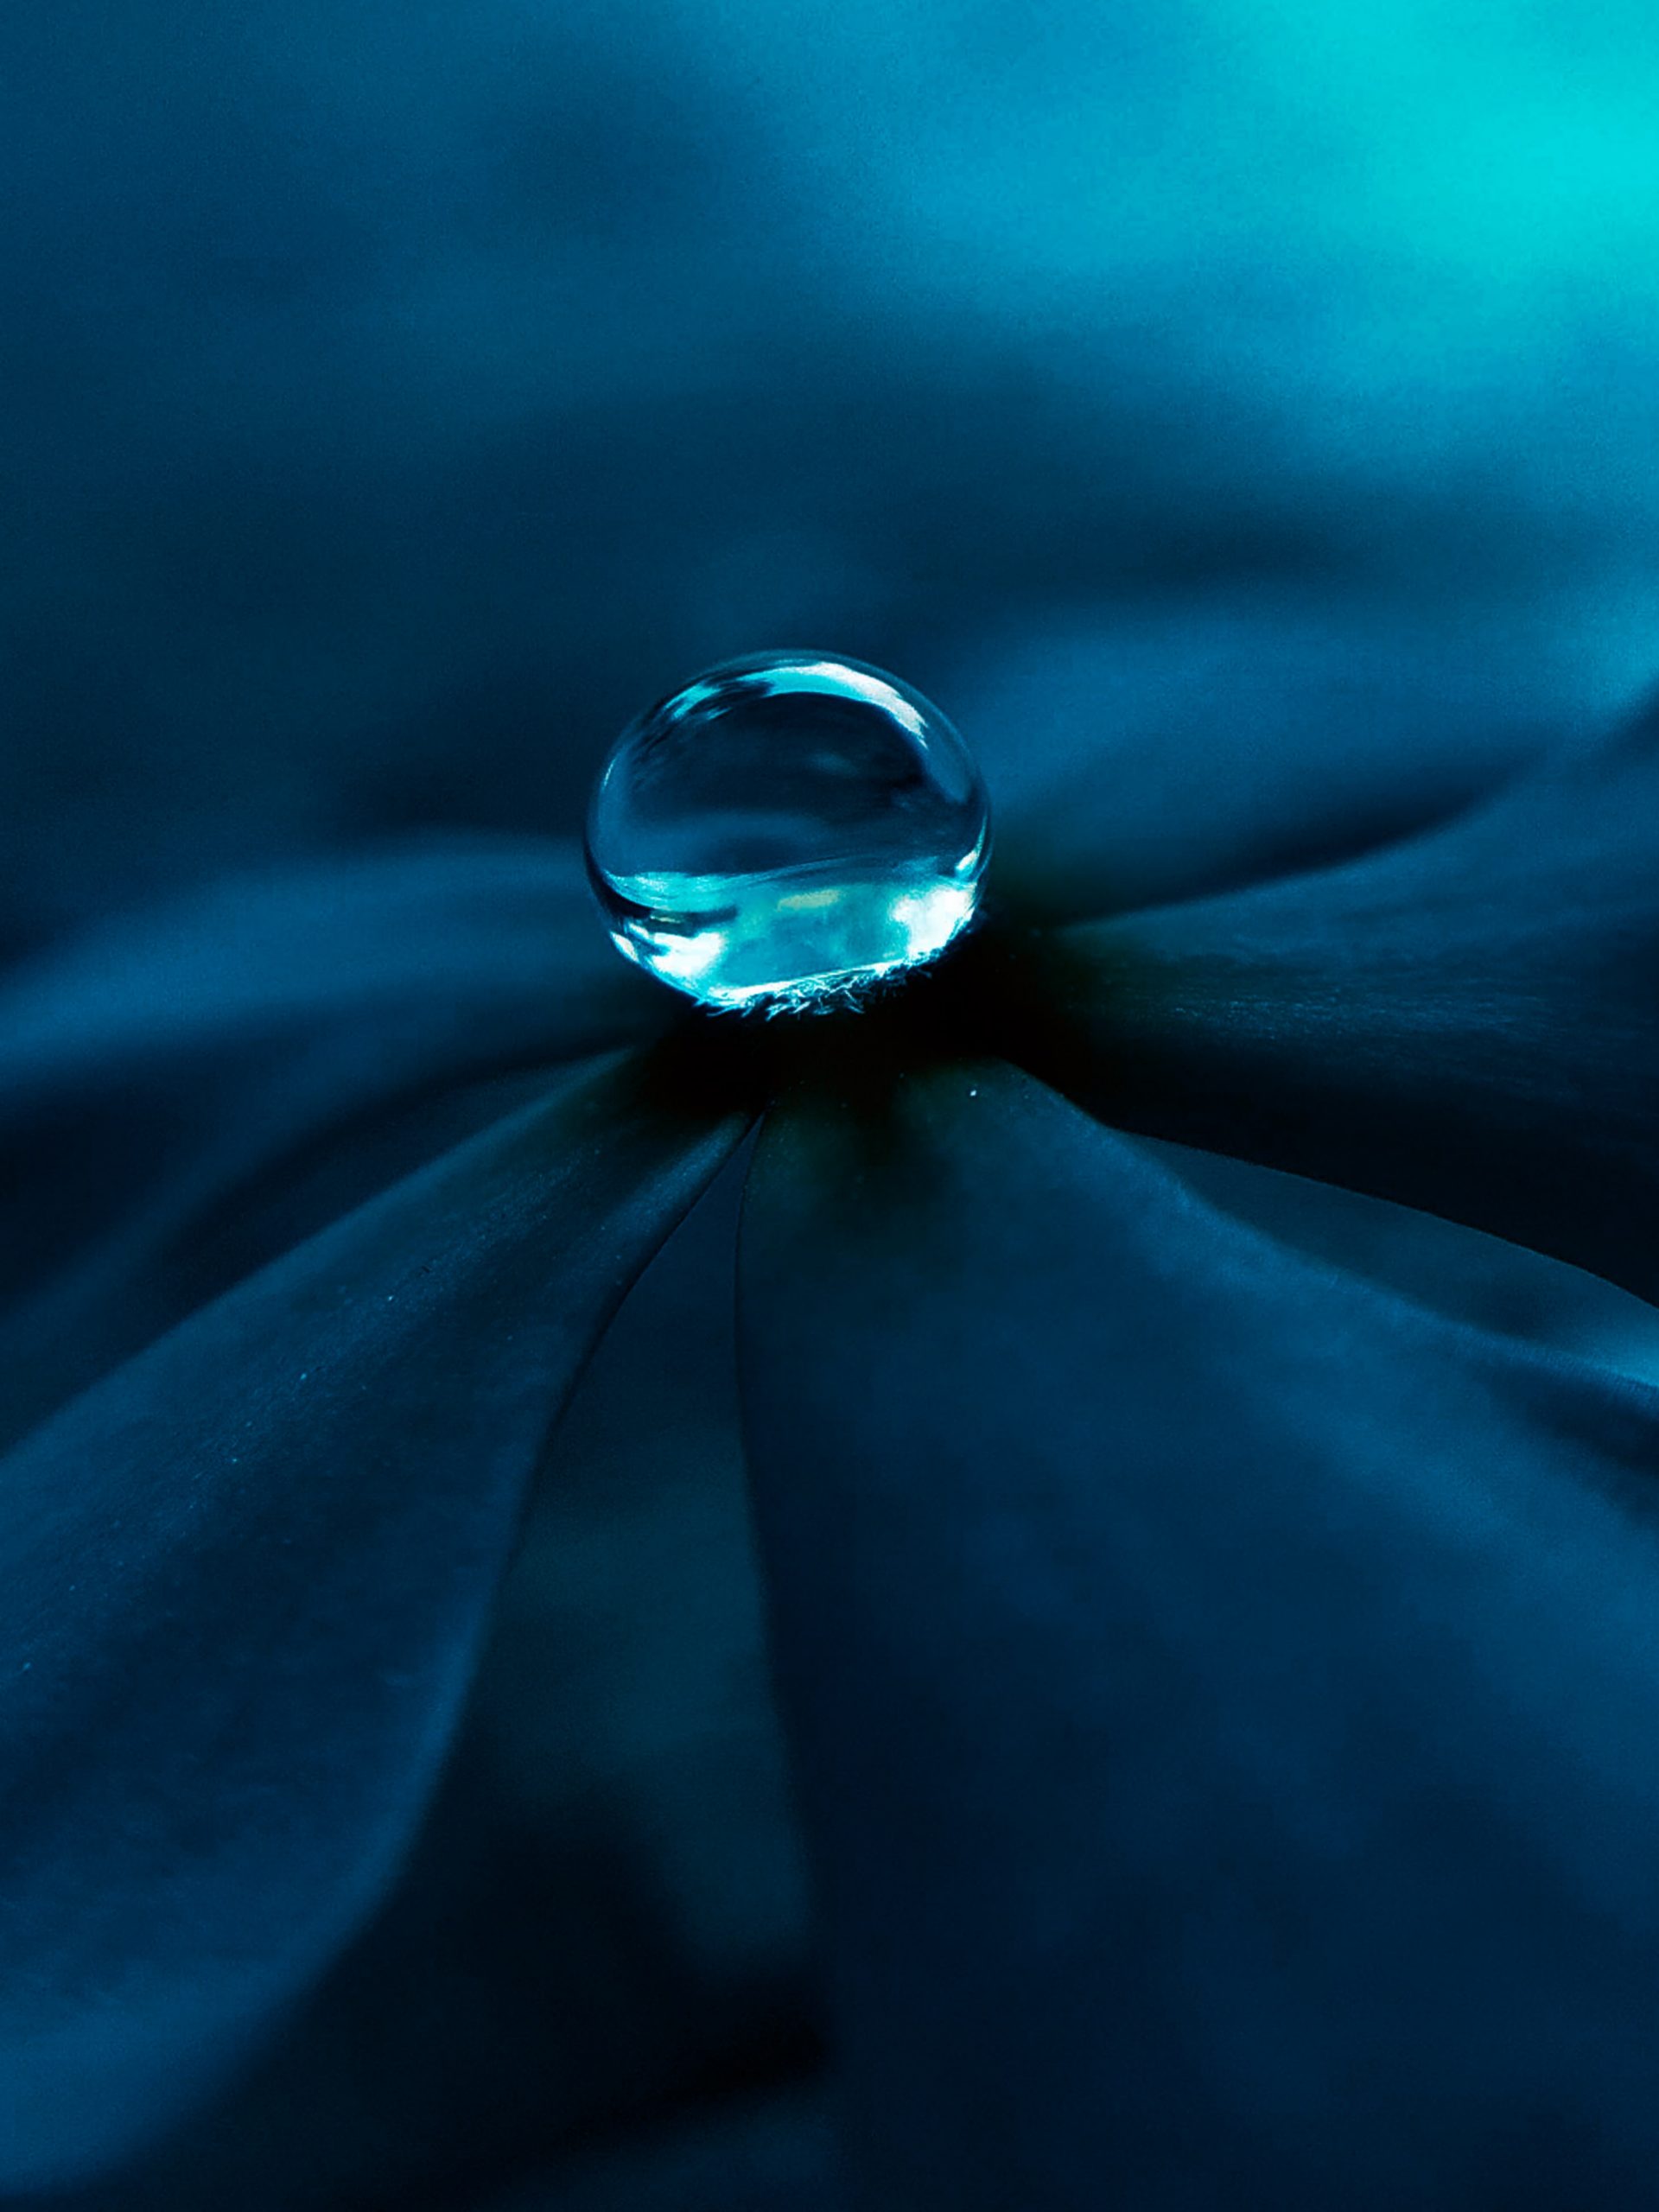 A water drop on a flower